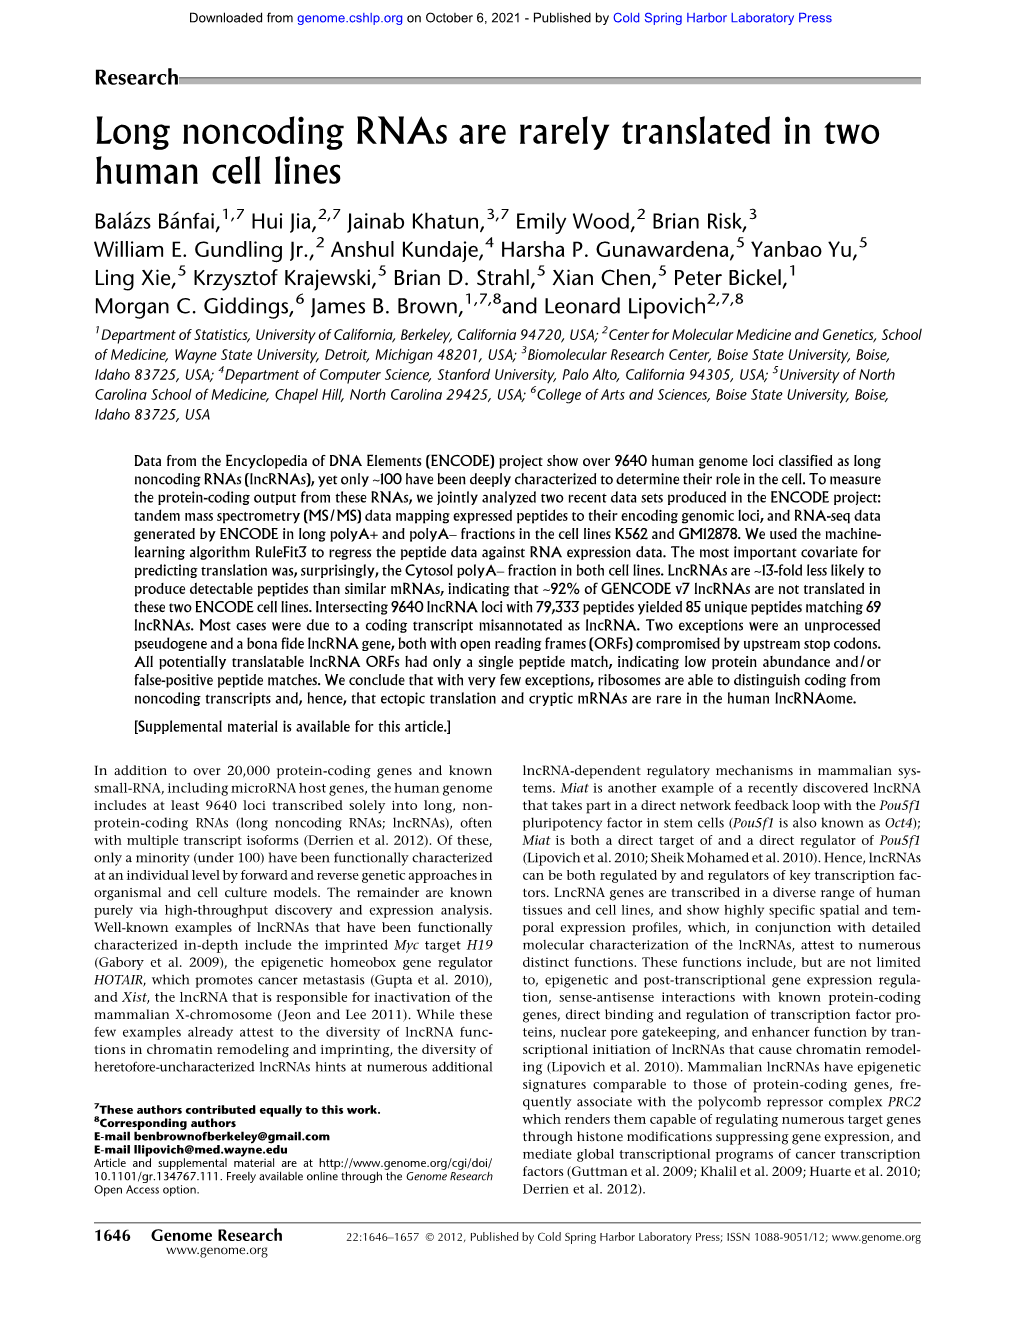 Long Noncoding Rnas Are Rarely Translated in Two Human Cell Lines